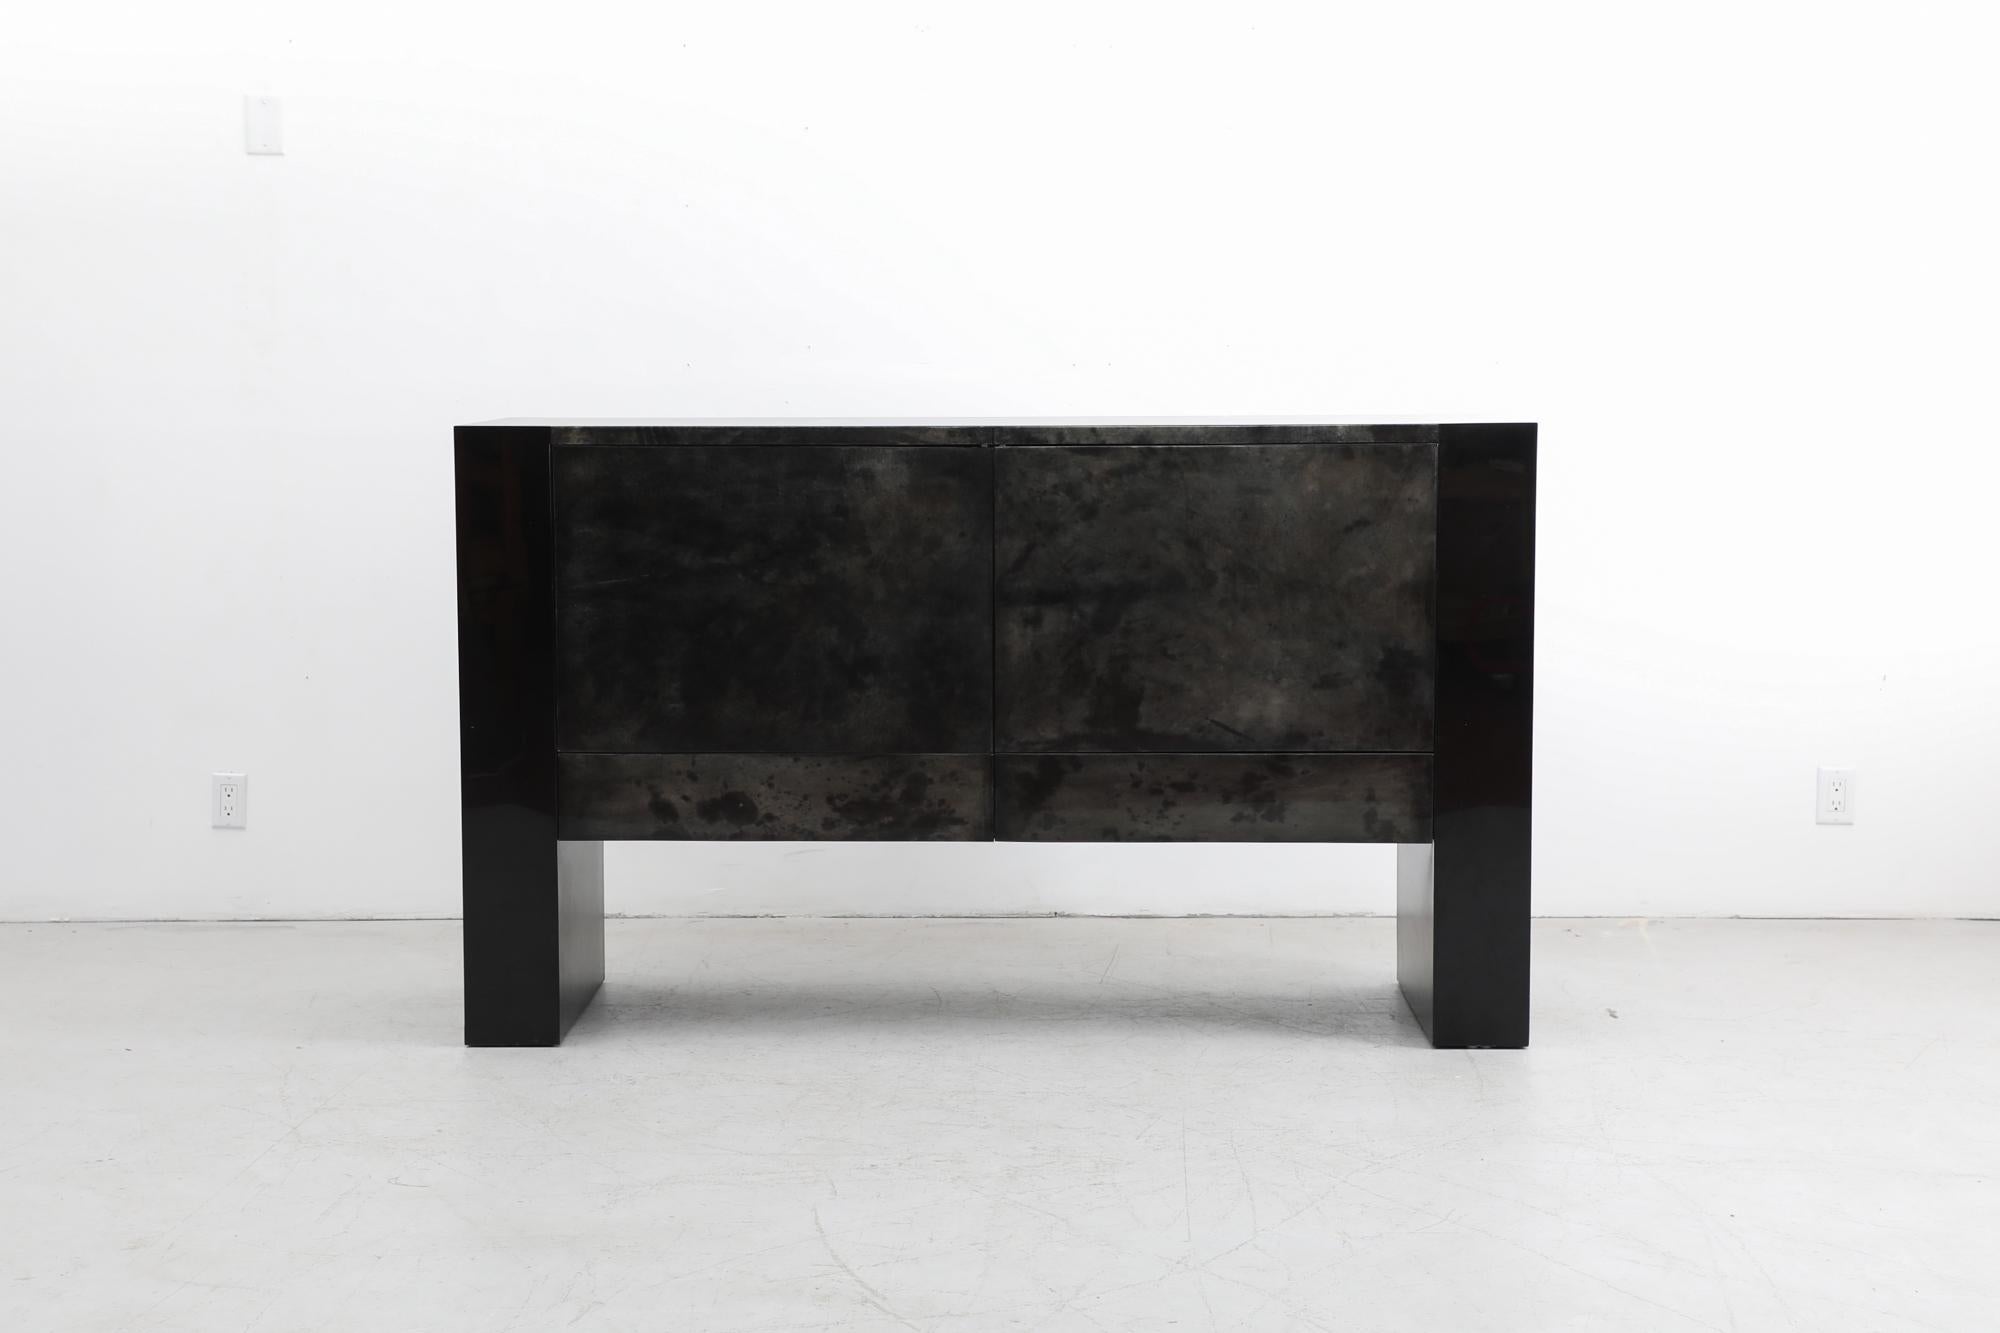 Special Aldo Tura style dark charcoal-greenish goatskin parchment covered sideboard with black lacquered sides. This credenza has double doors over two lower drawers. The cabinets have room for shelves, but have been removed by it's previous owner.